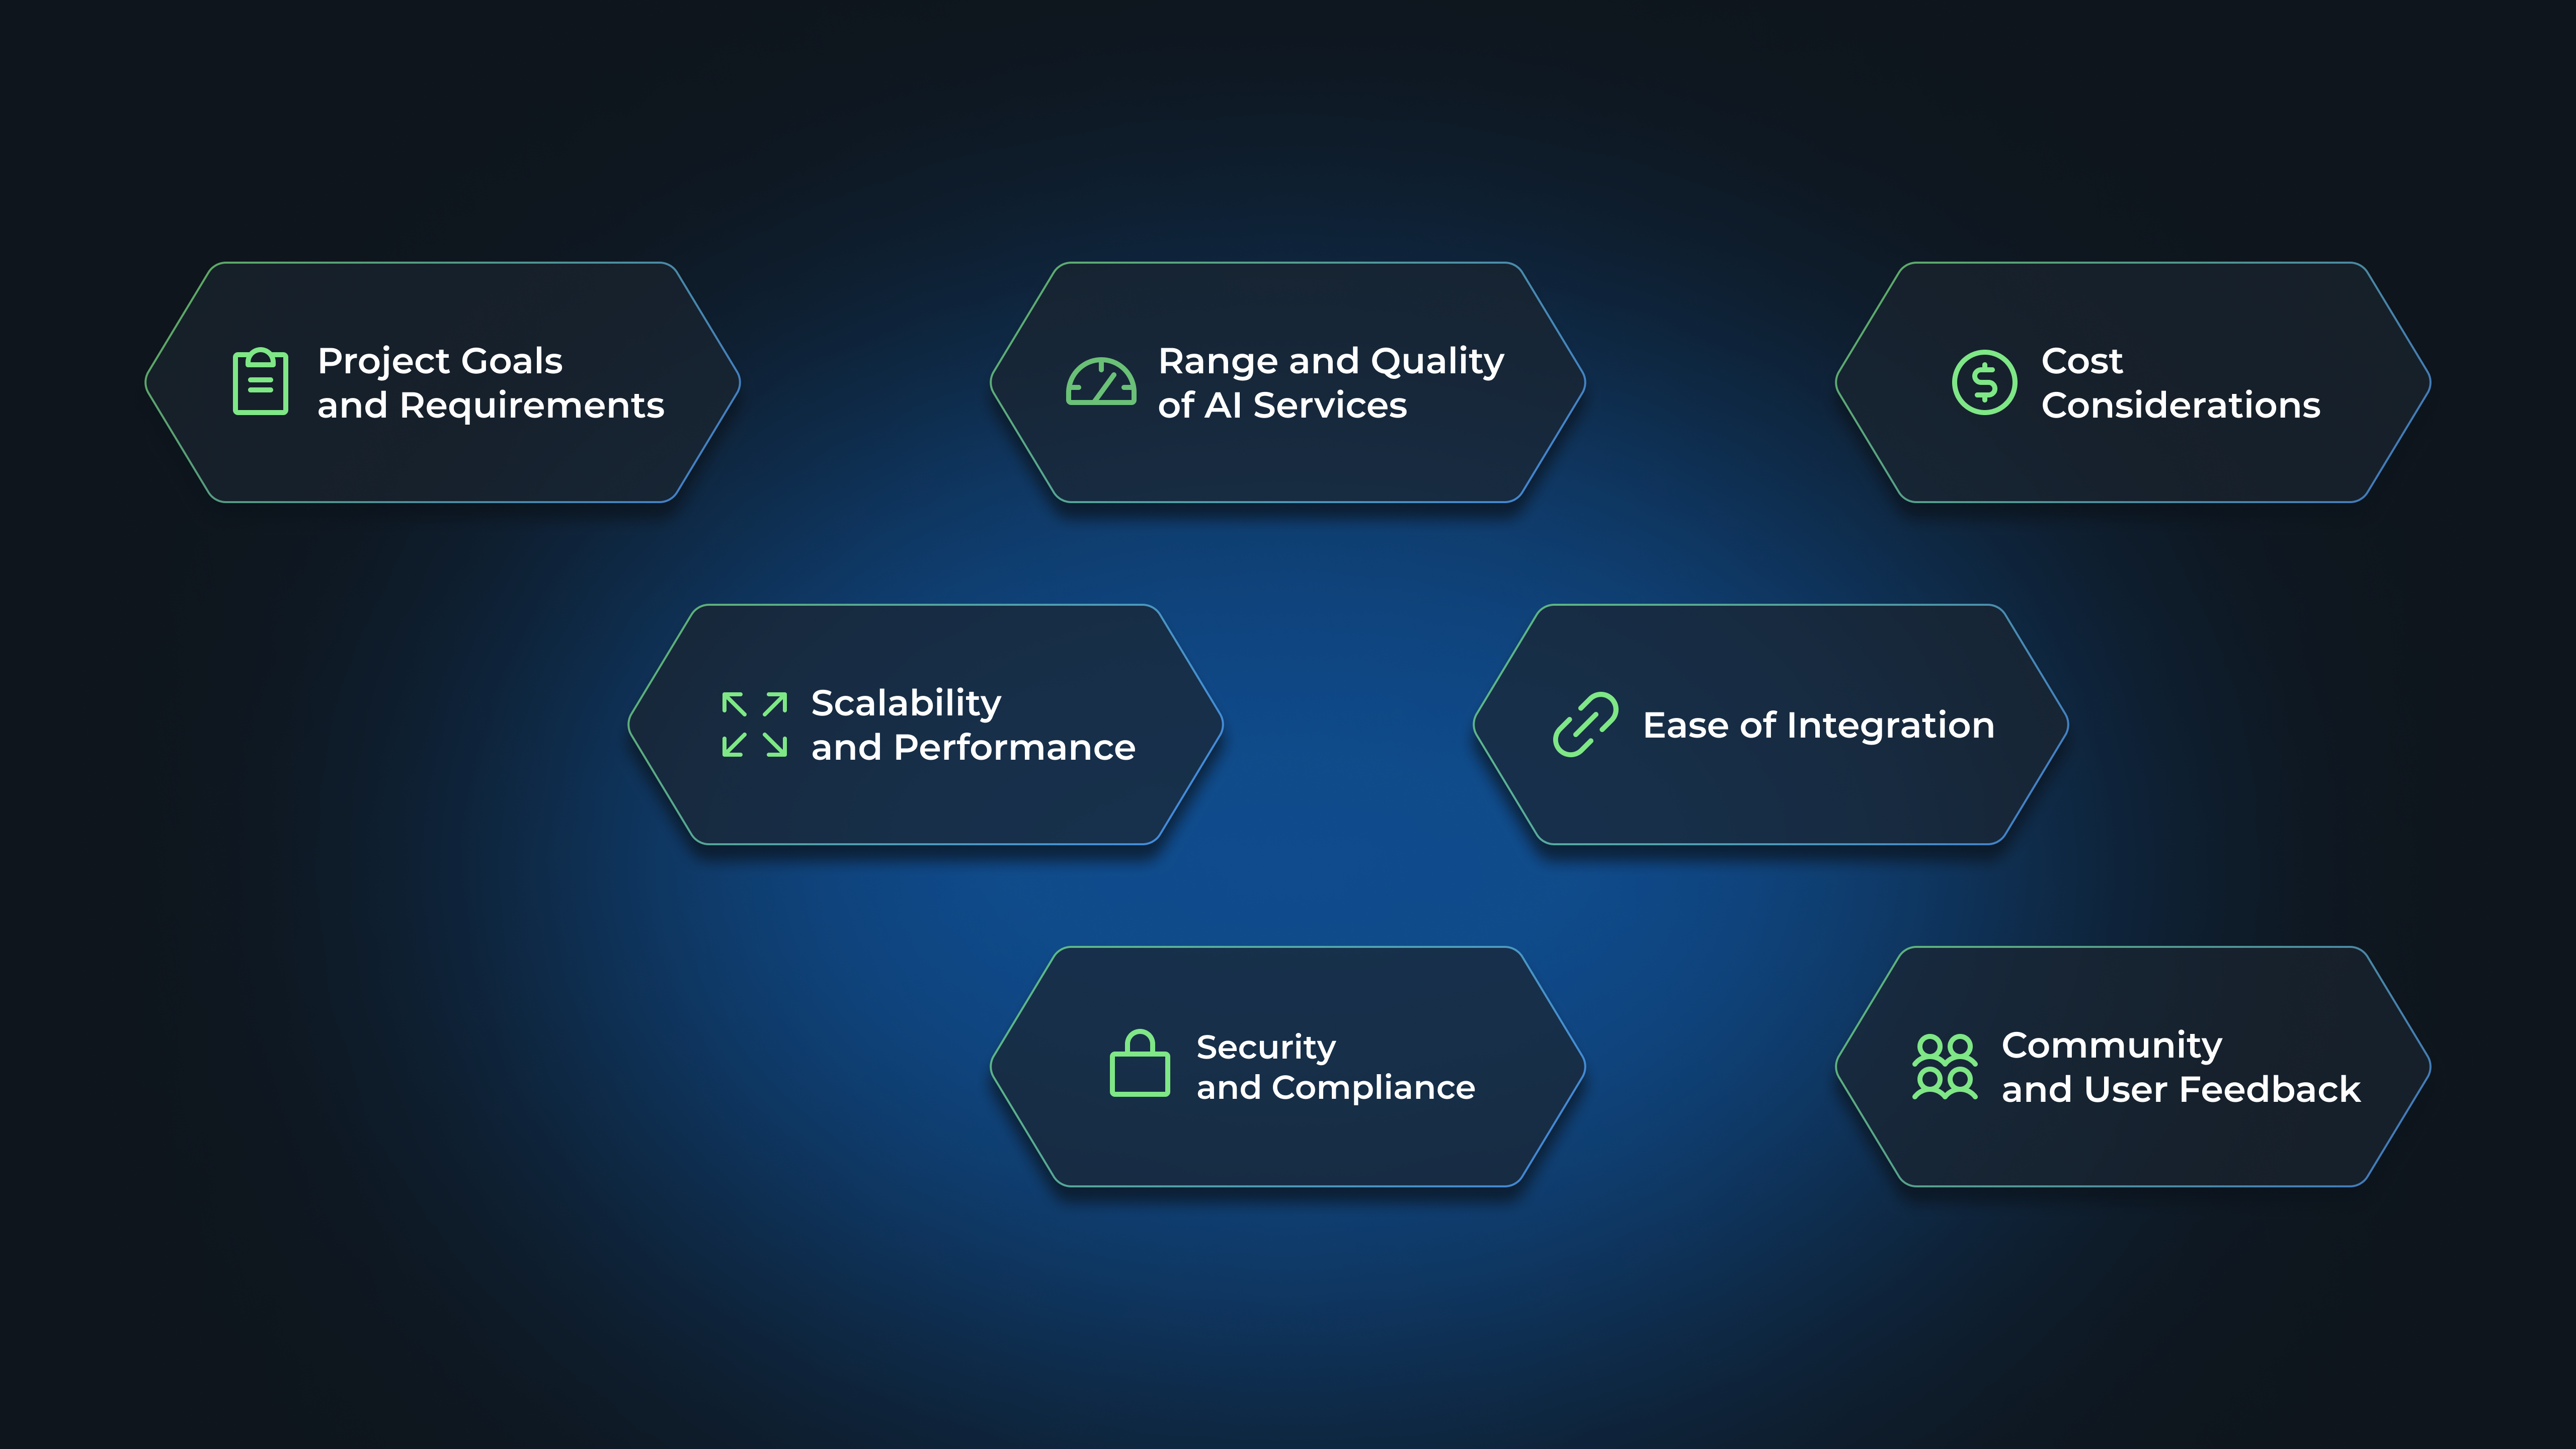 Project Goals and Requirements, Range and Quality of AI Services, Cost Considerations, Scalability and Performance, Ease of Integration, Security and Compliance, Community and User Feedback
